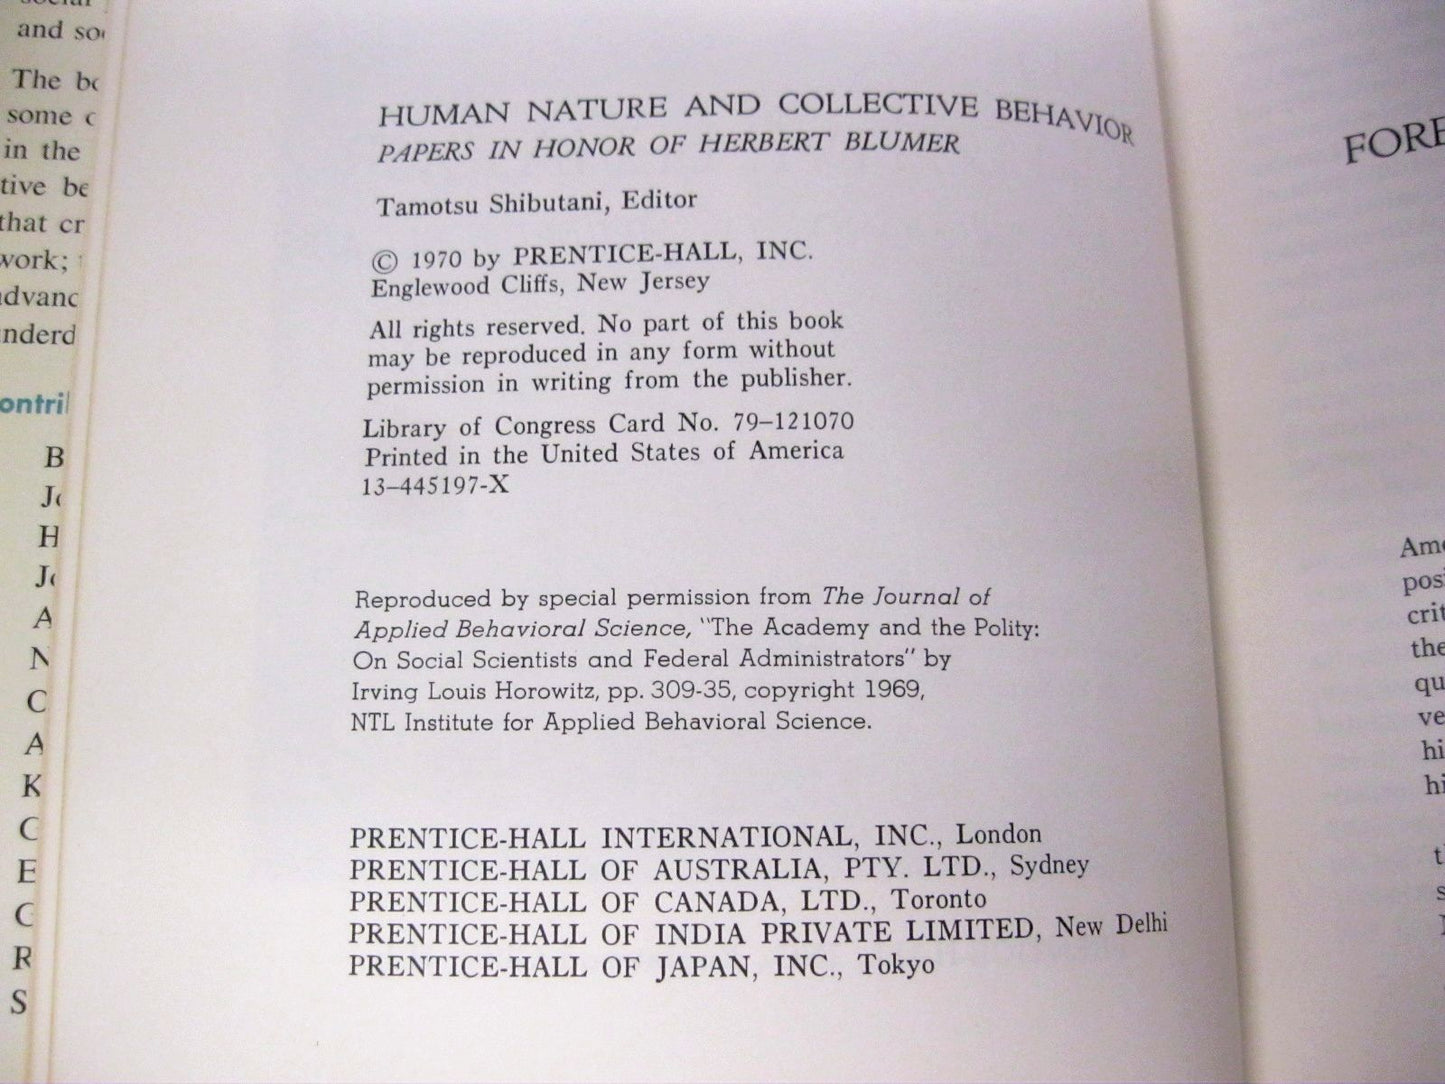 Human Nature and Collective Behavior: Papers in Honor of Herbert Blumer edited by Tamotsu Shibutani